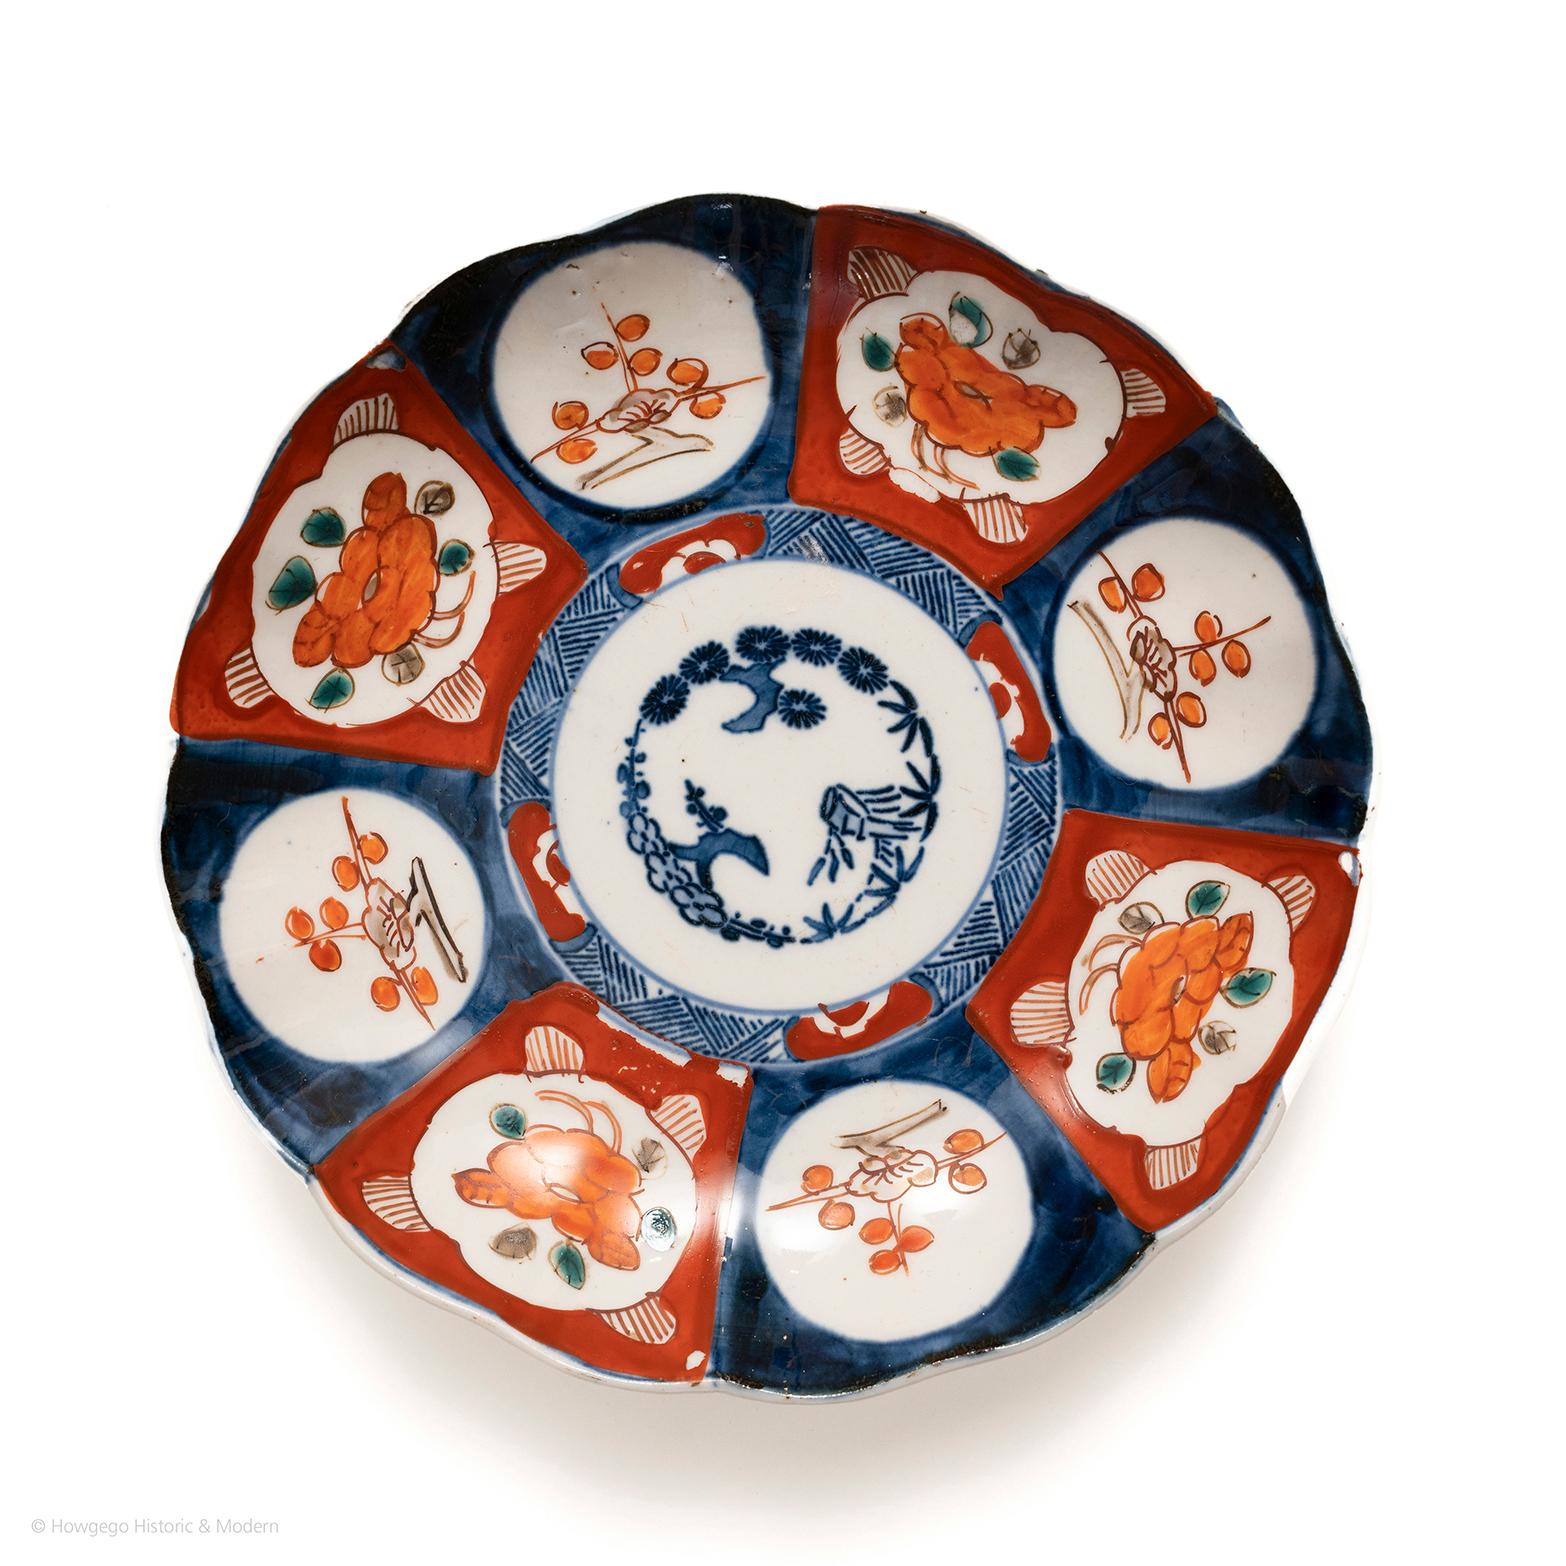 Striking Imari lobed plate with simple, bold ornamentation indicating it is an early piece. The centre with three stylised bonsai evoking the quality of reflection surrounded by a trellis and flowerhead border. The rim with eight vignettes of two